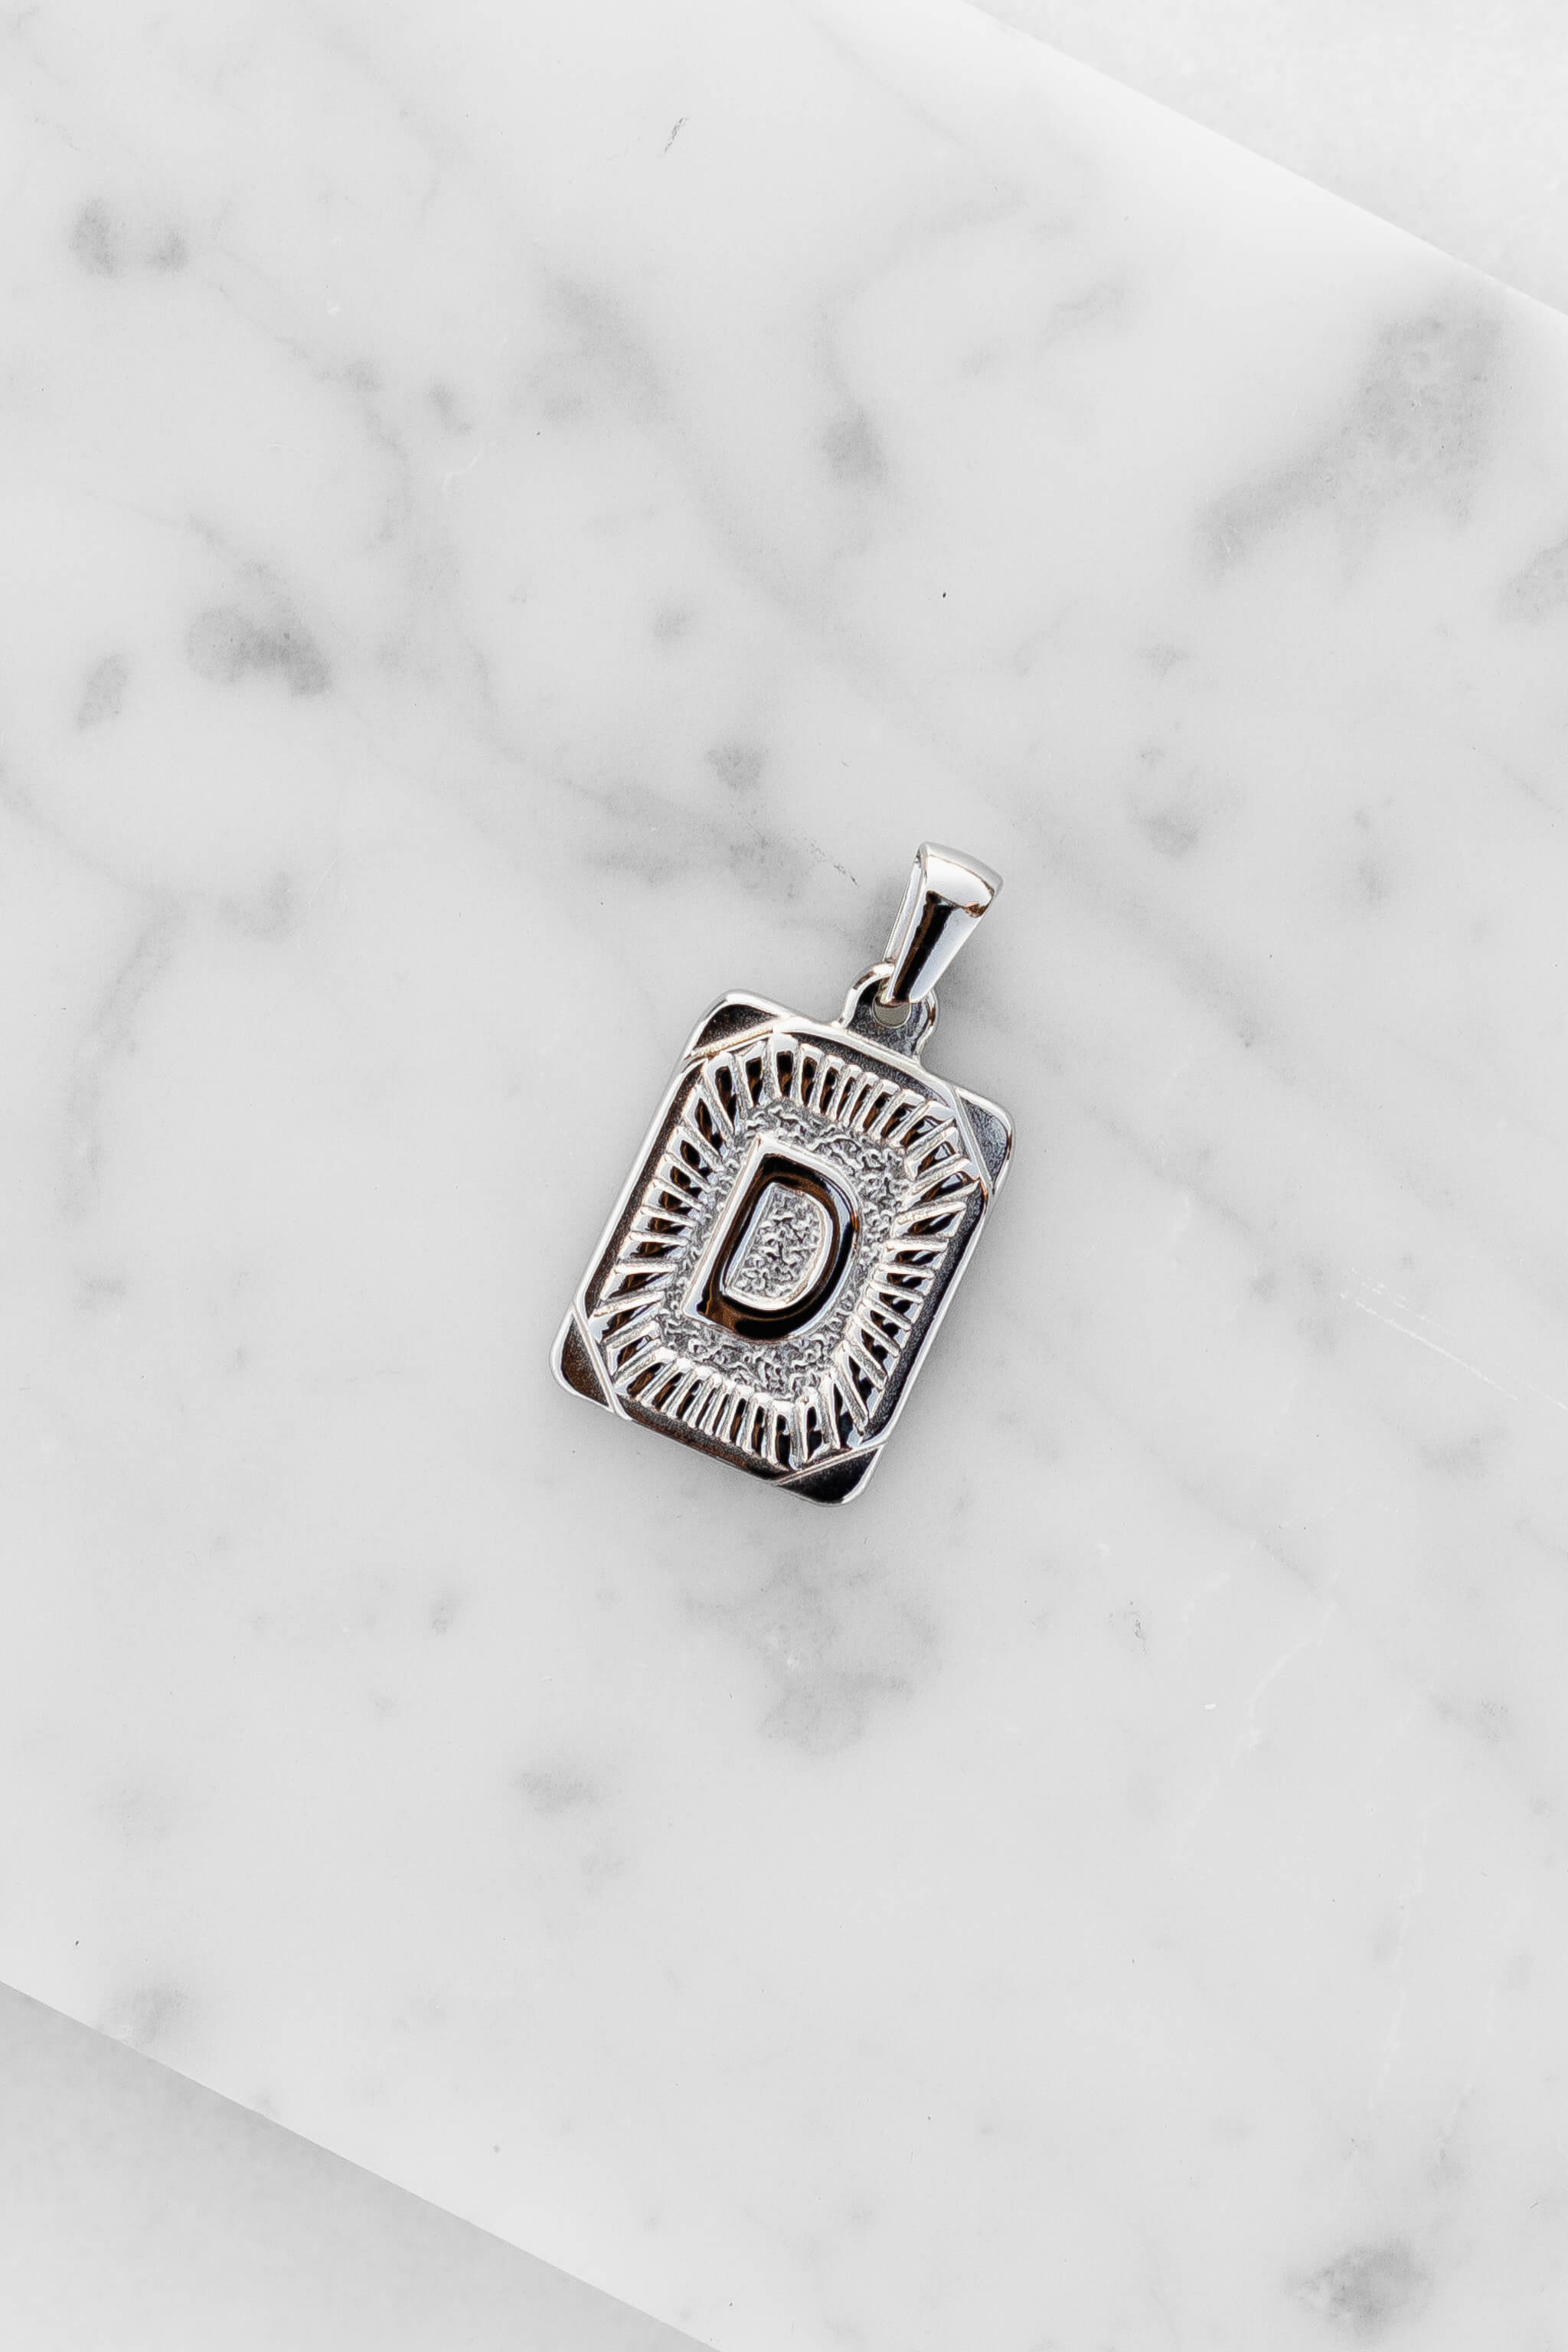 Silver Monogram Letter "D" Charm laying on a marble